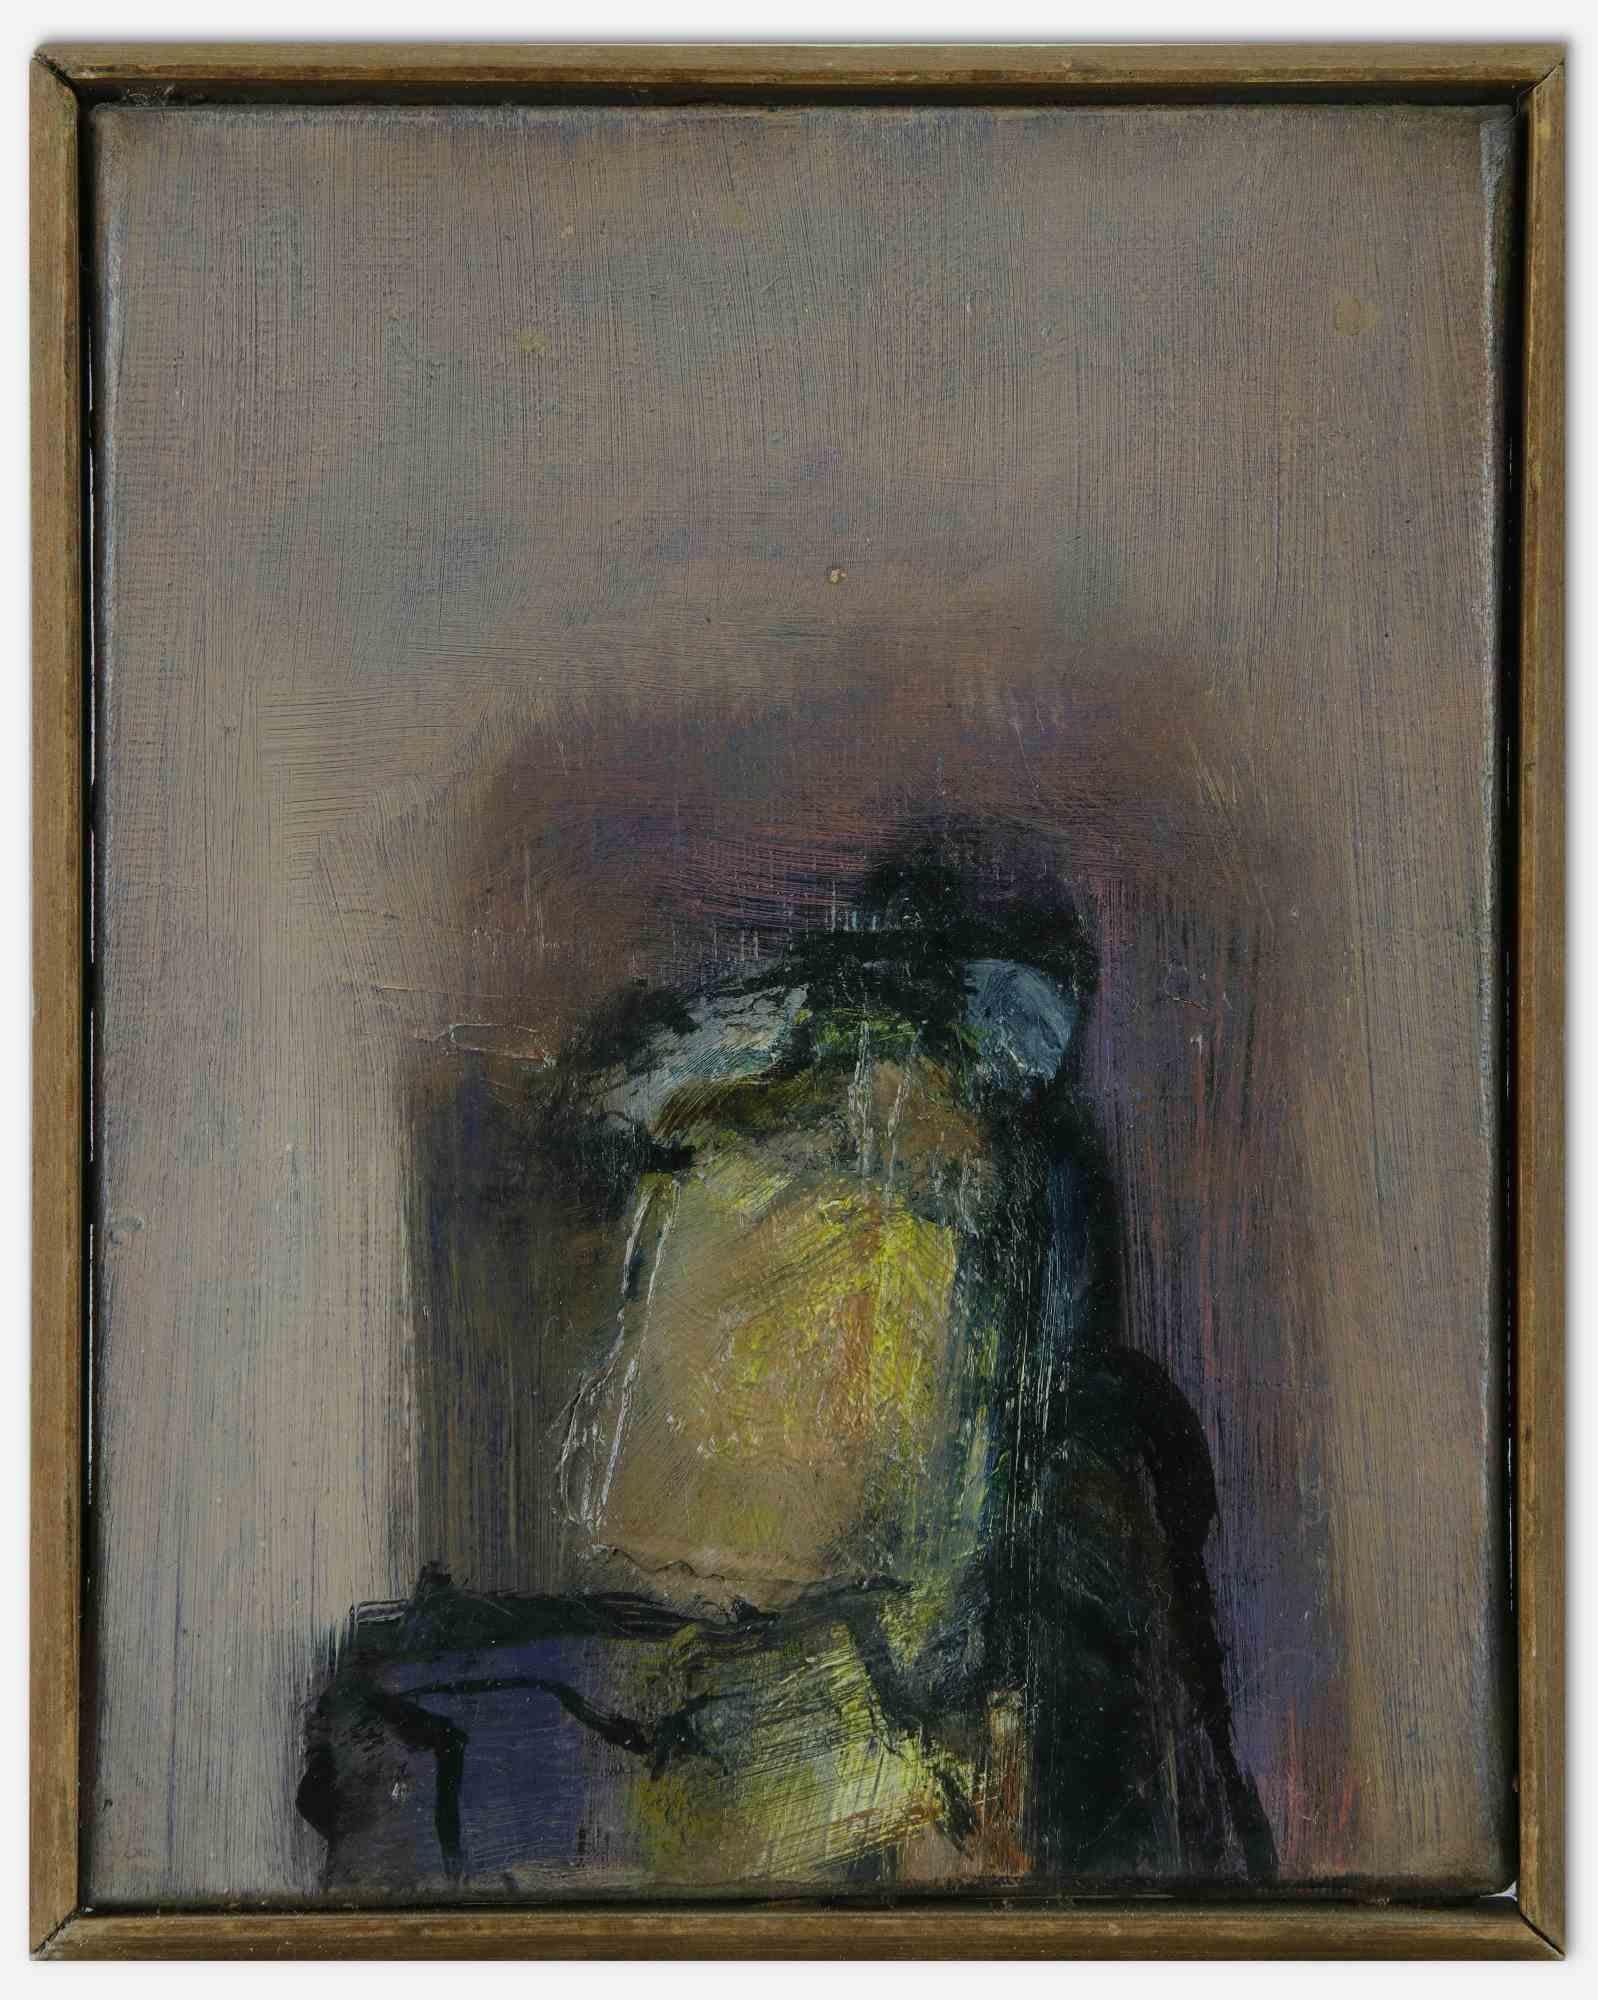 Abstract Figure is an original contemporary artwork realized by the artist Behçet Safa (1934-2018).

Mixed colored oil on canvas.

Hand signed and dated on the back.